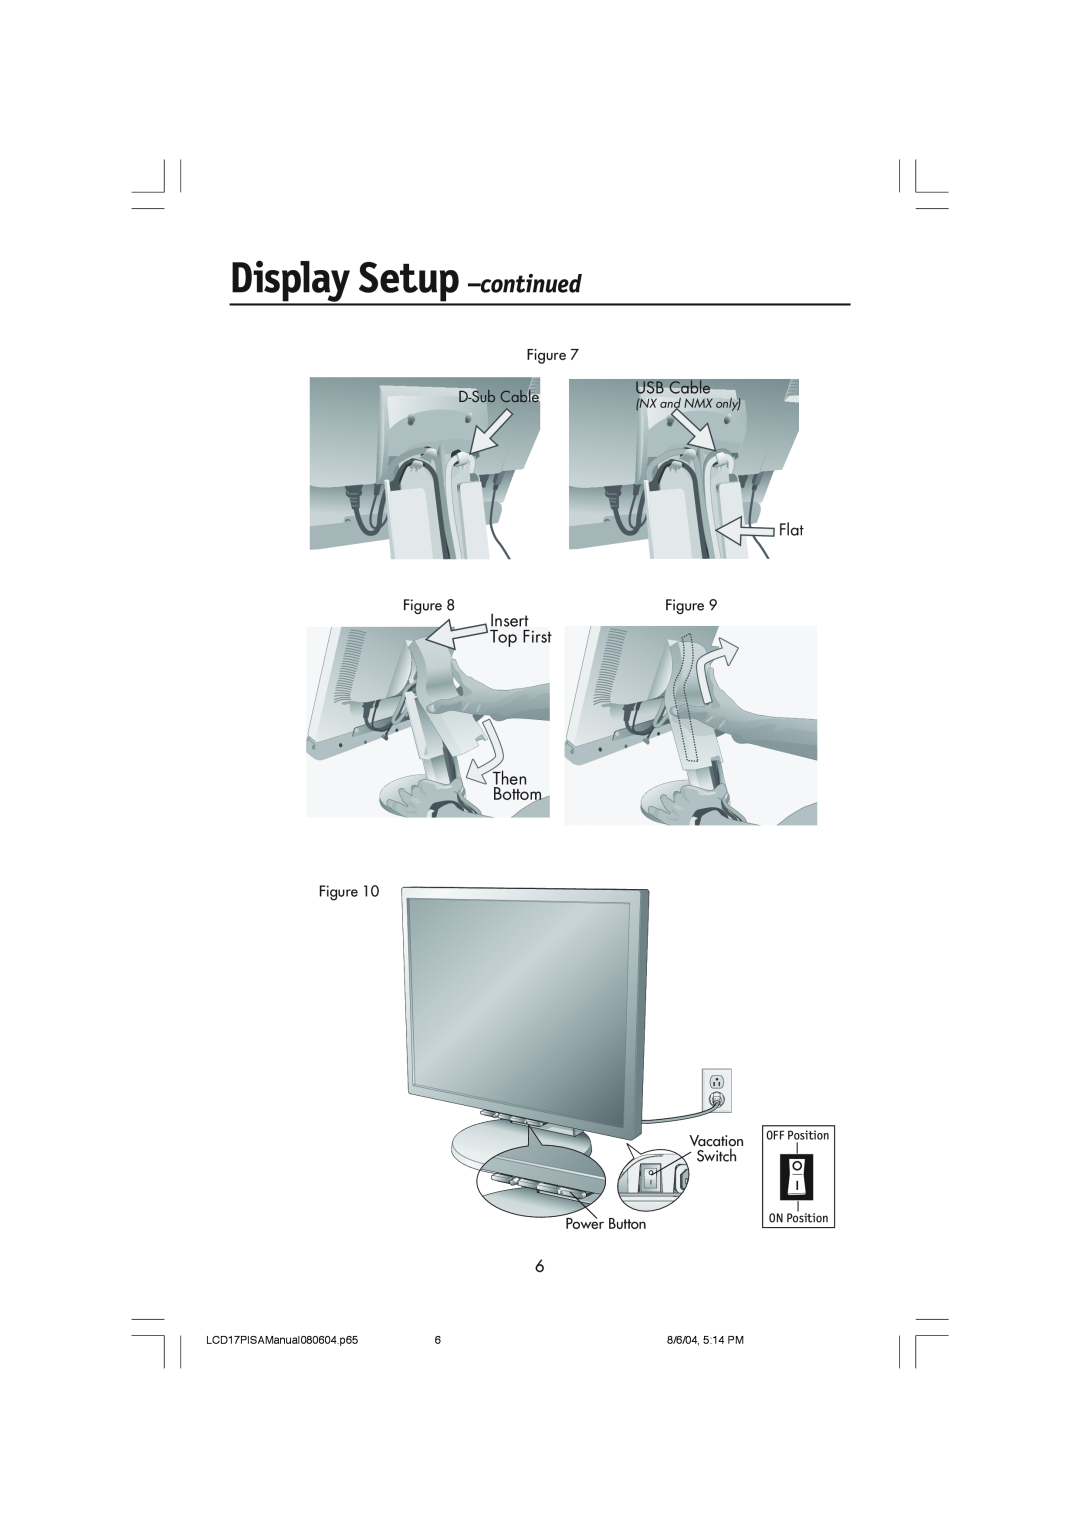 NEC LCD1770V user manual Display Setup -continued, Insert Top First Then Bottom, USB Cable, Flat, D-Sub Cable, Power Button 